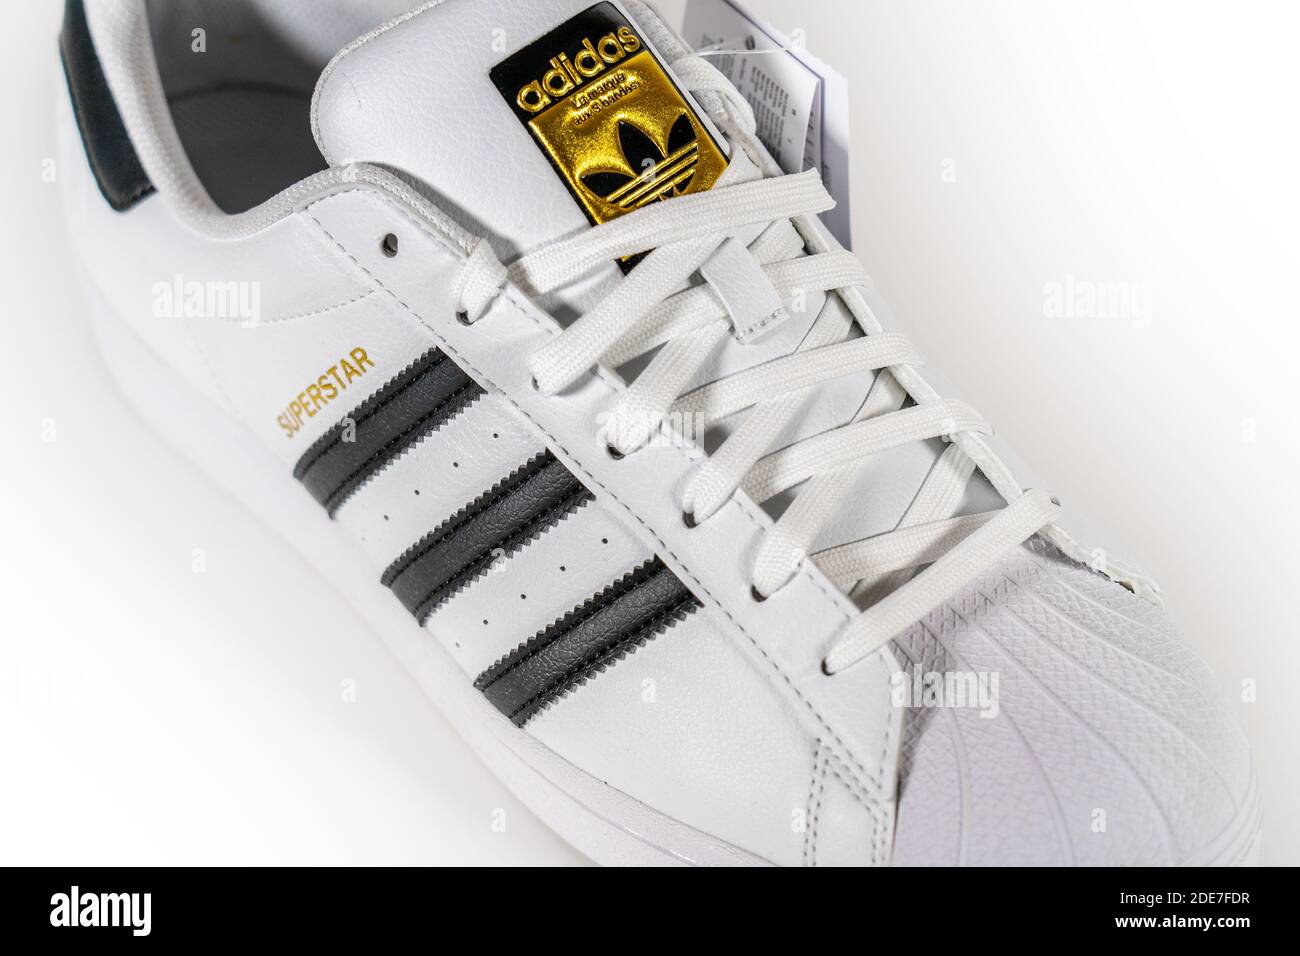 Adidas In Moscow High Resolution Stock Photography and Images - Alamy